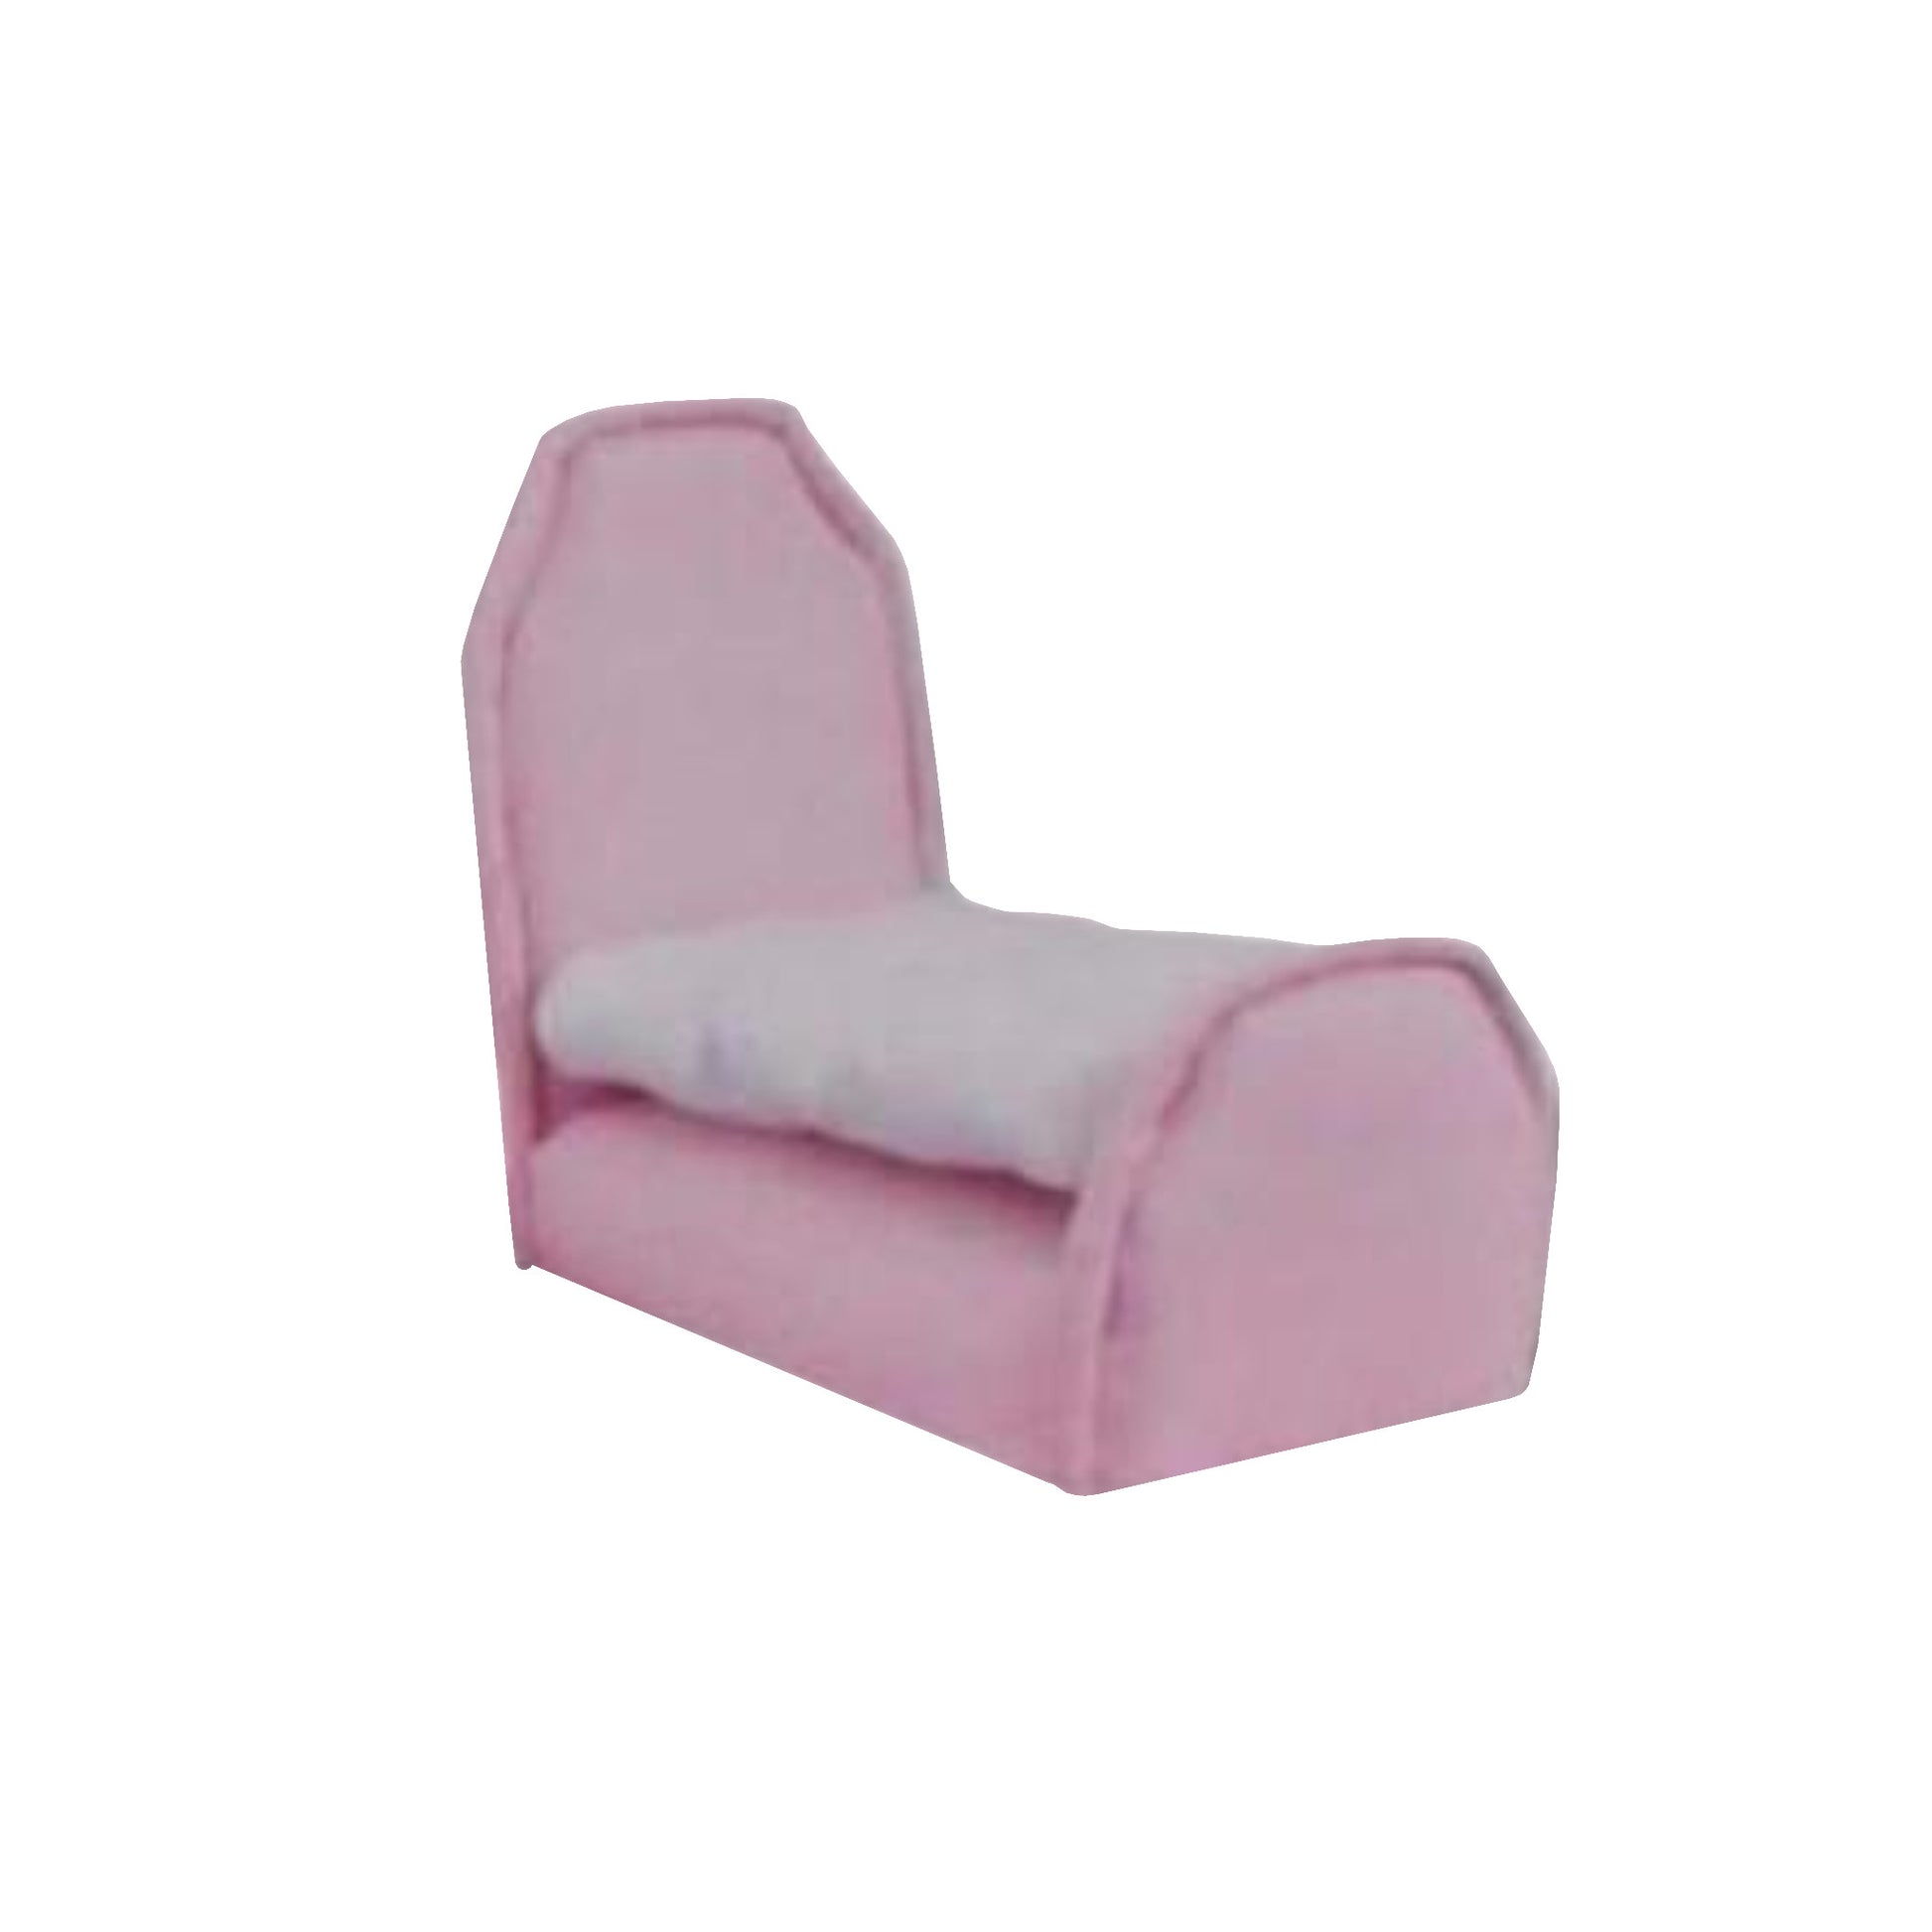 Upholstered Light Pink Doll Bed for 3-inch dolls